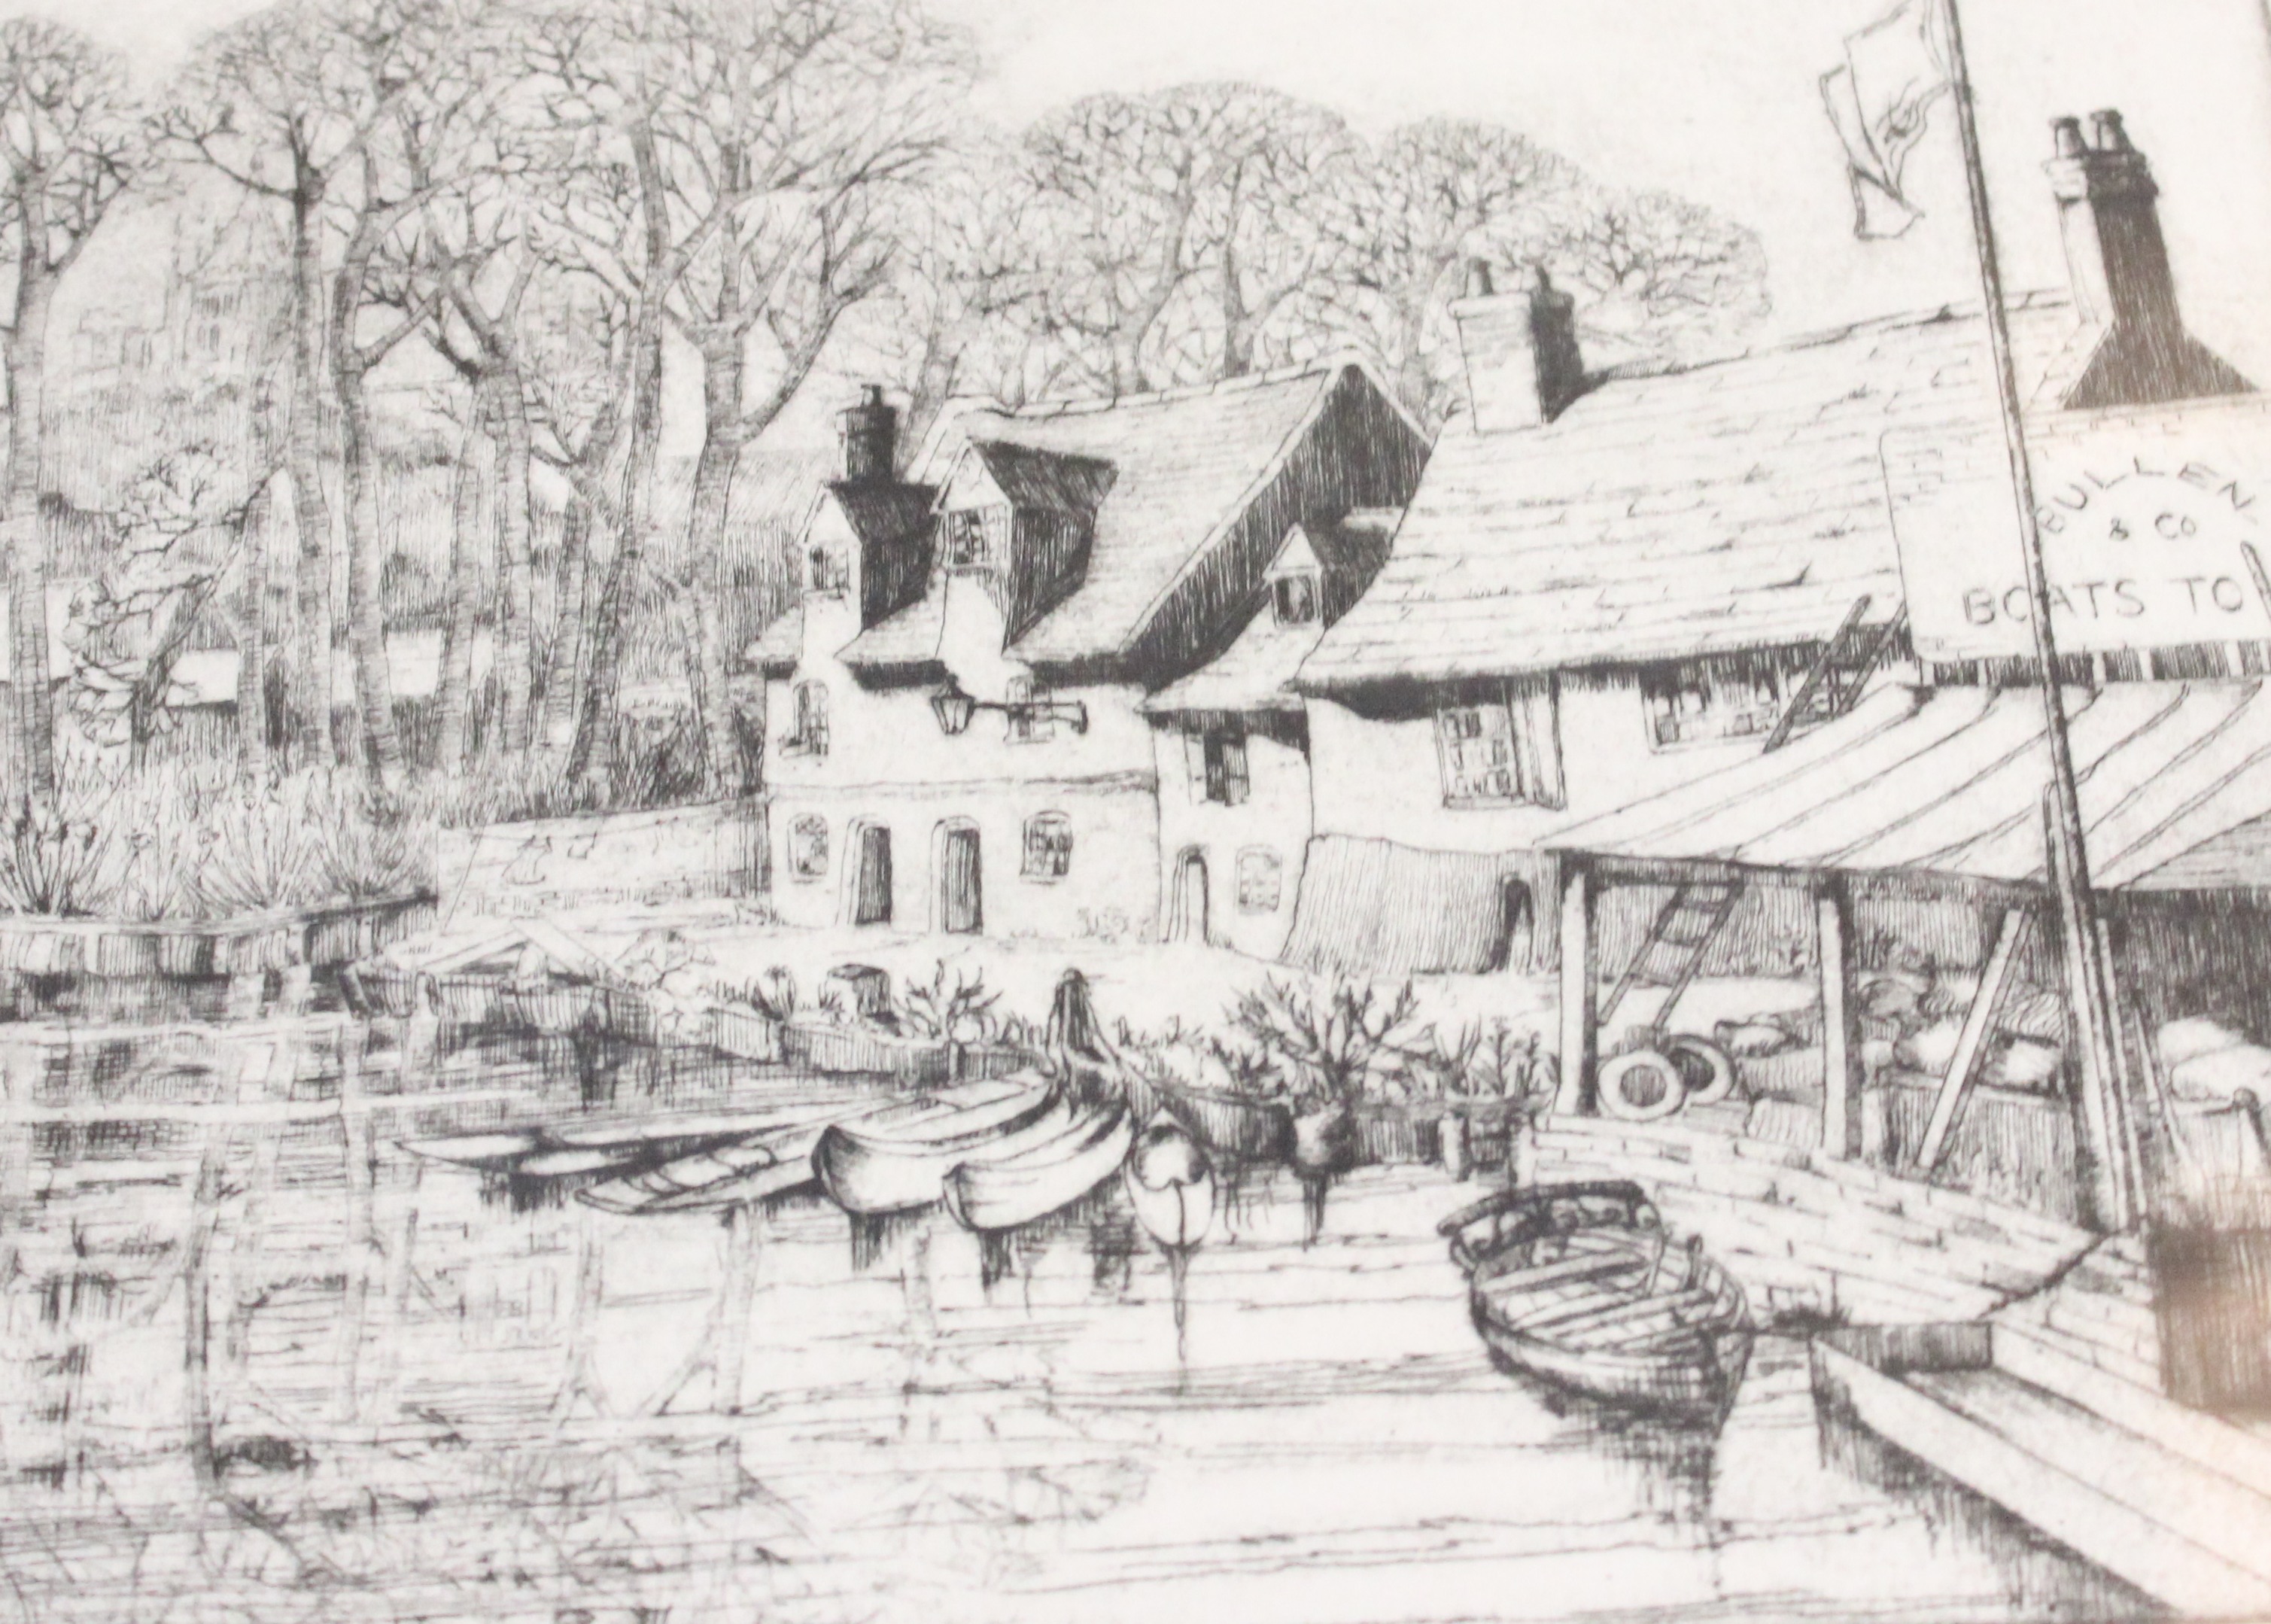 Christina M. C. Sheriff'Fishers Lane from the River Cambridge' 1929EtchingSigned in pencil to the